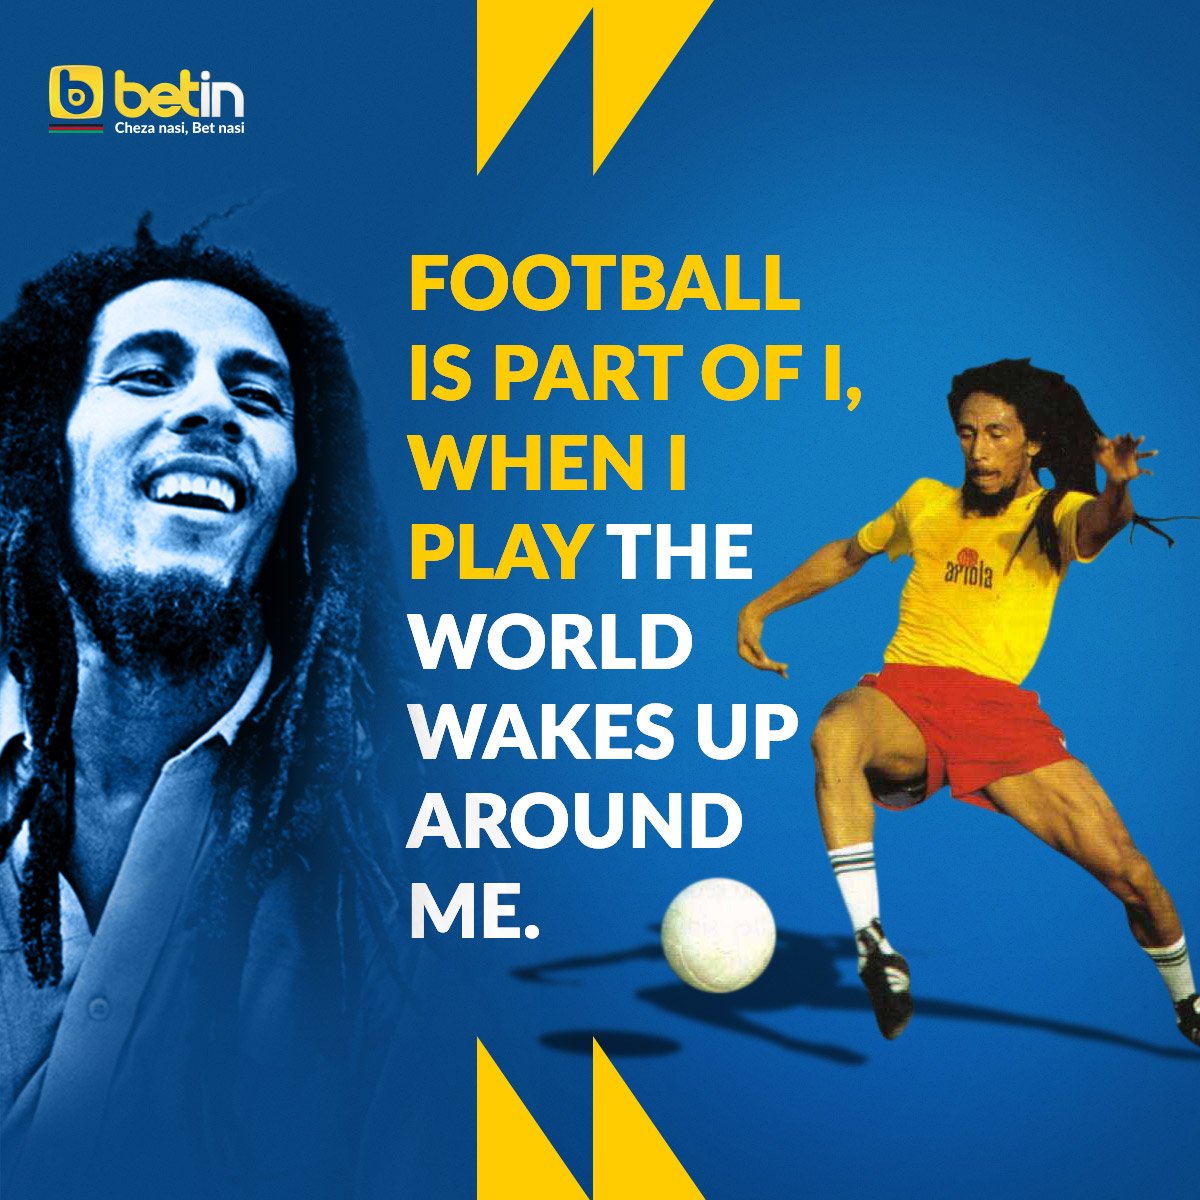 The G.O.A.T would have turned 74 years today! 

Happy Birthday Bob Marley! 